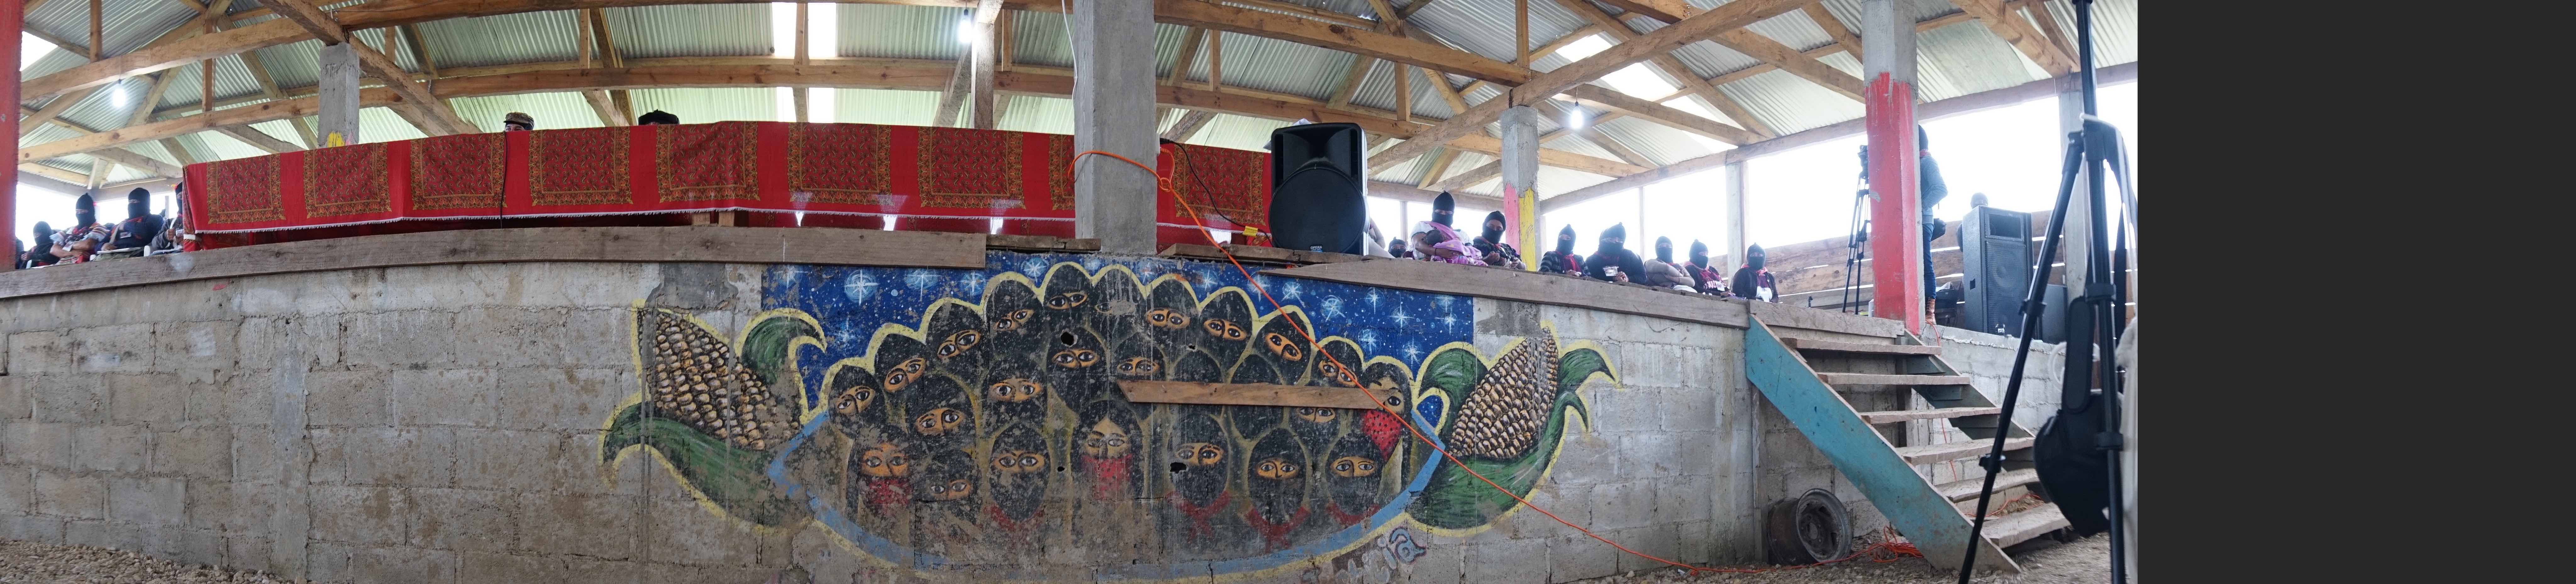 Before the stage where the high council members of the Zapatista movement sit lies a mural on which the black-masked faces of anonymous Zapatistas stare out at the world, their penetrating gazes flanked by two shucks of maize—a symbol for the earth and a life lived close to the land. Image by Jared Olson. Mexico, 2018.